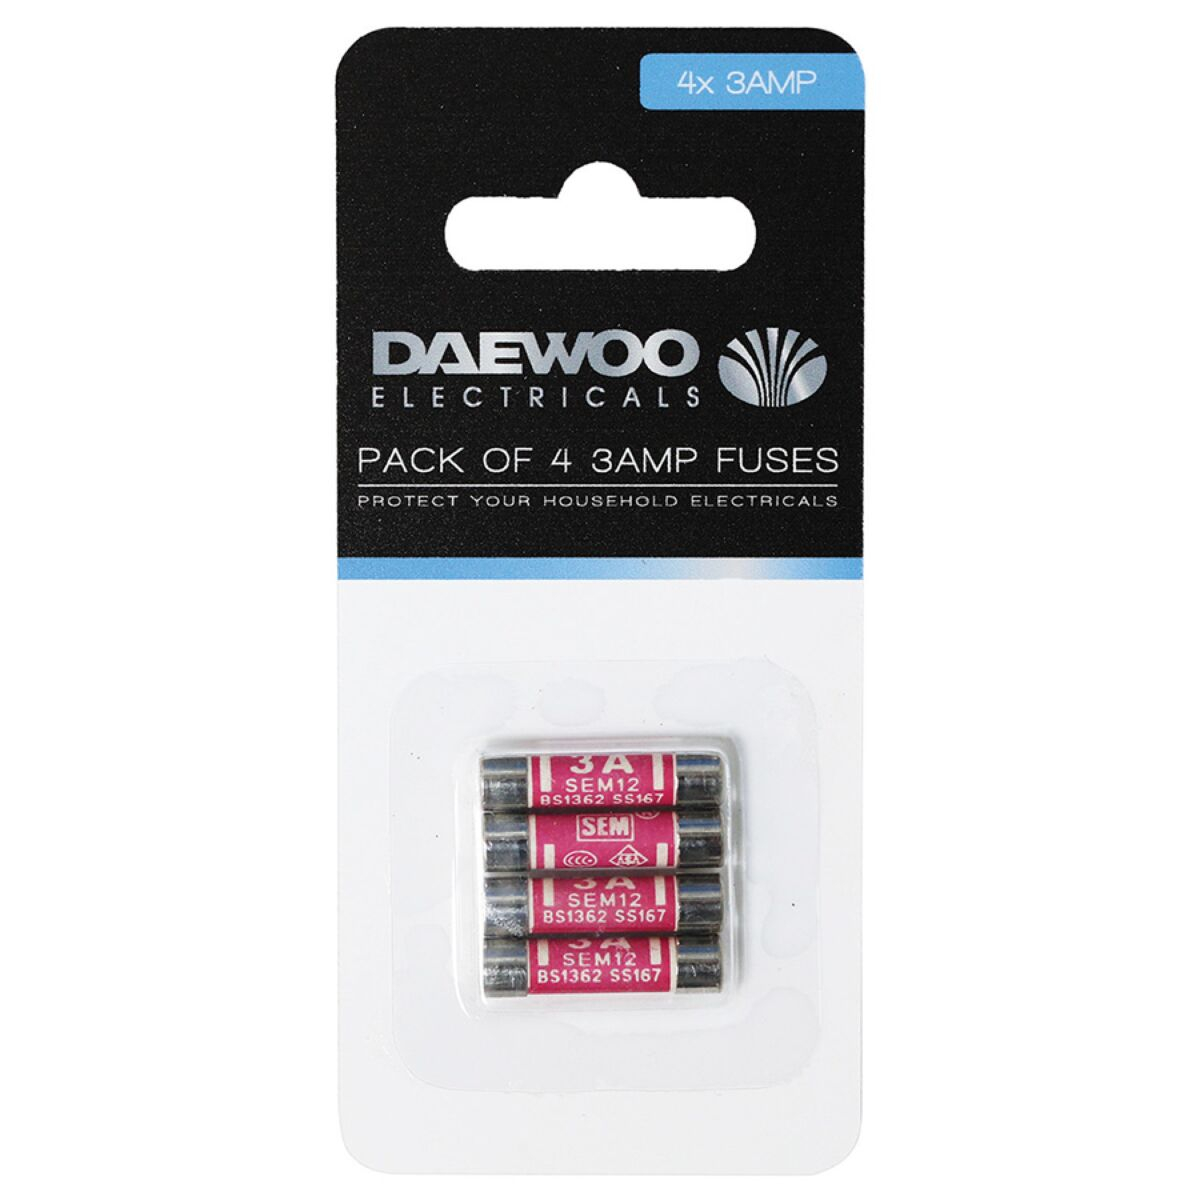 Daewoo 3 Amp Fuses 4 Pack throughout dimensions 1200 X 1200